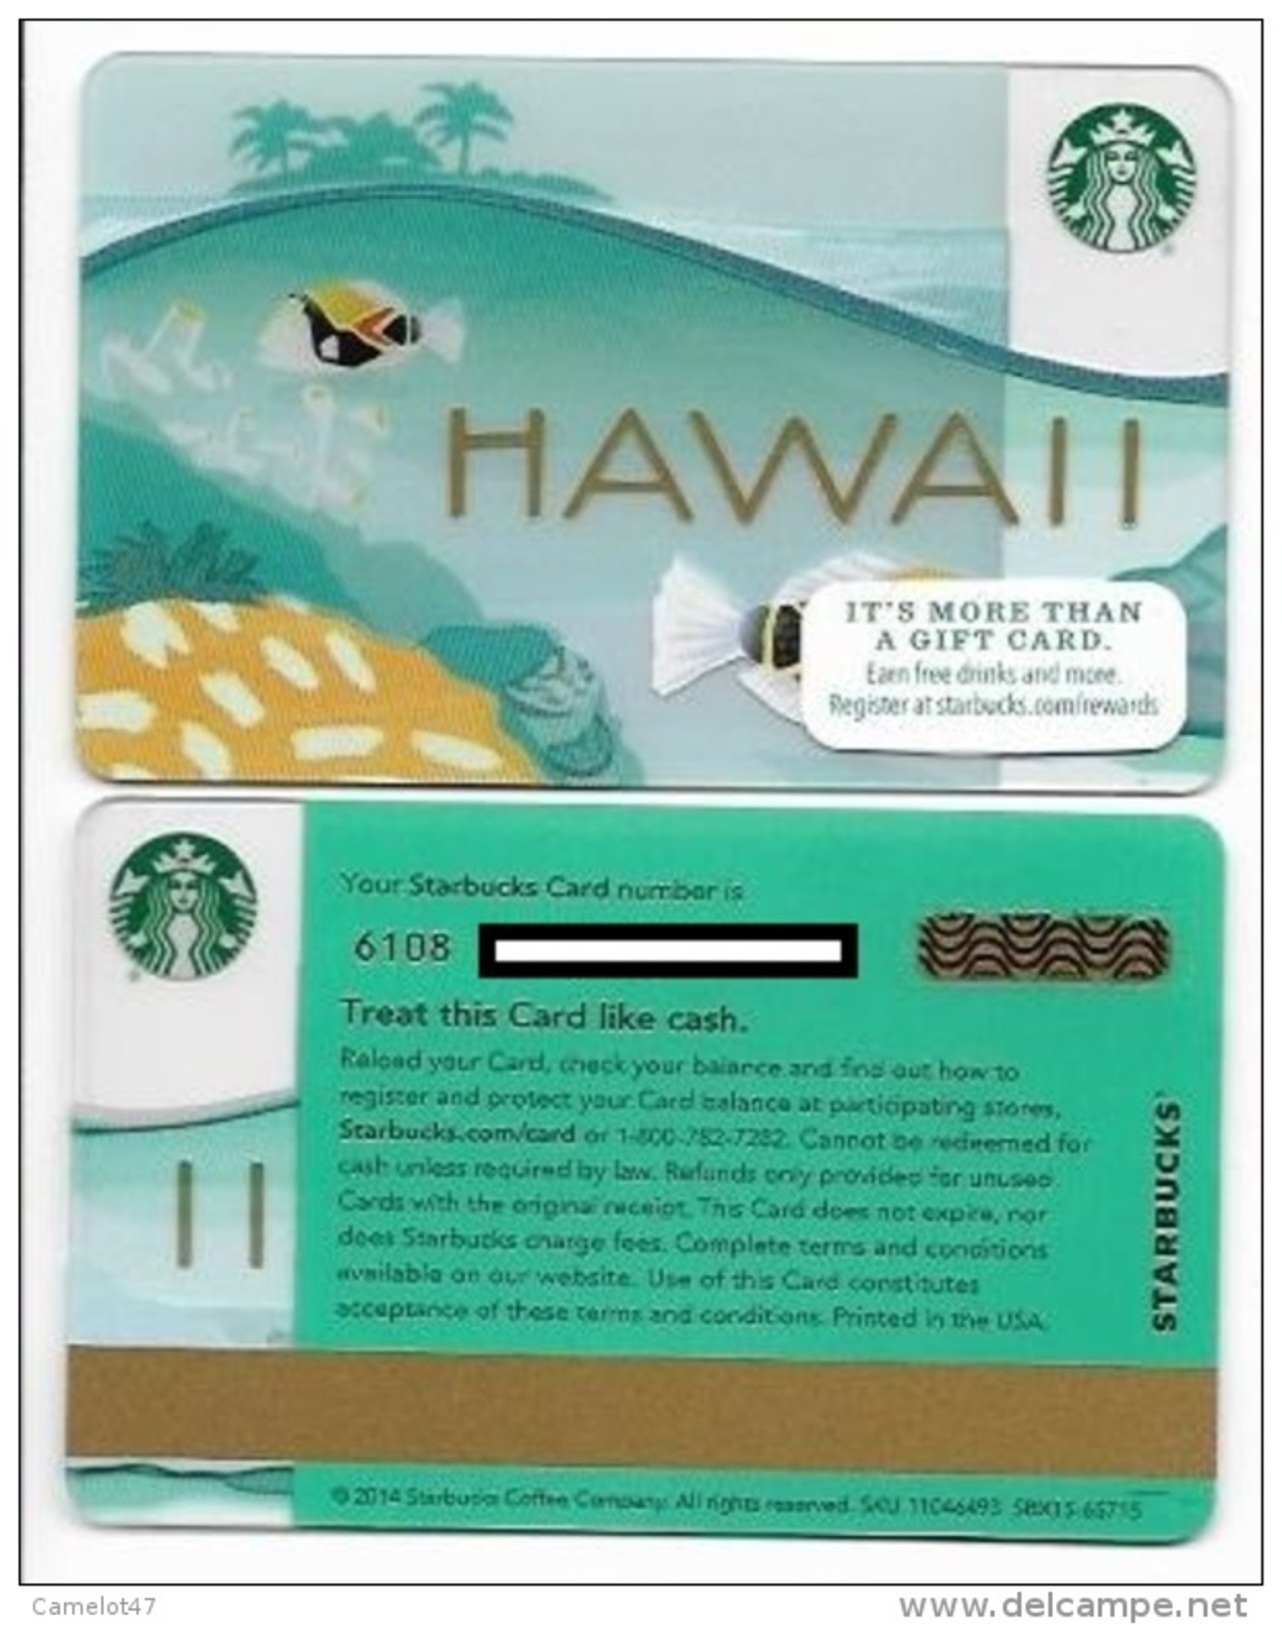 Starbucks U.S.A. Cities  "Hawaii" 2015 Gift Card No Value, Serial 6108,  Mint Condition, Limited Edition - Gift Cards